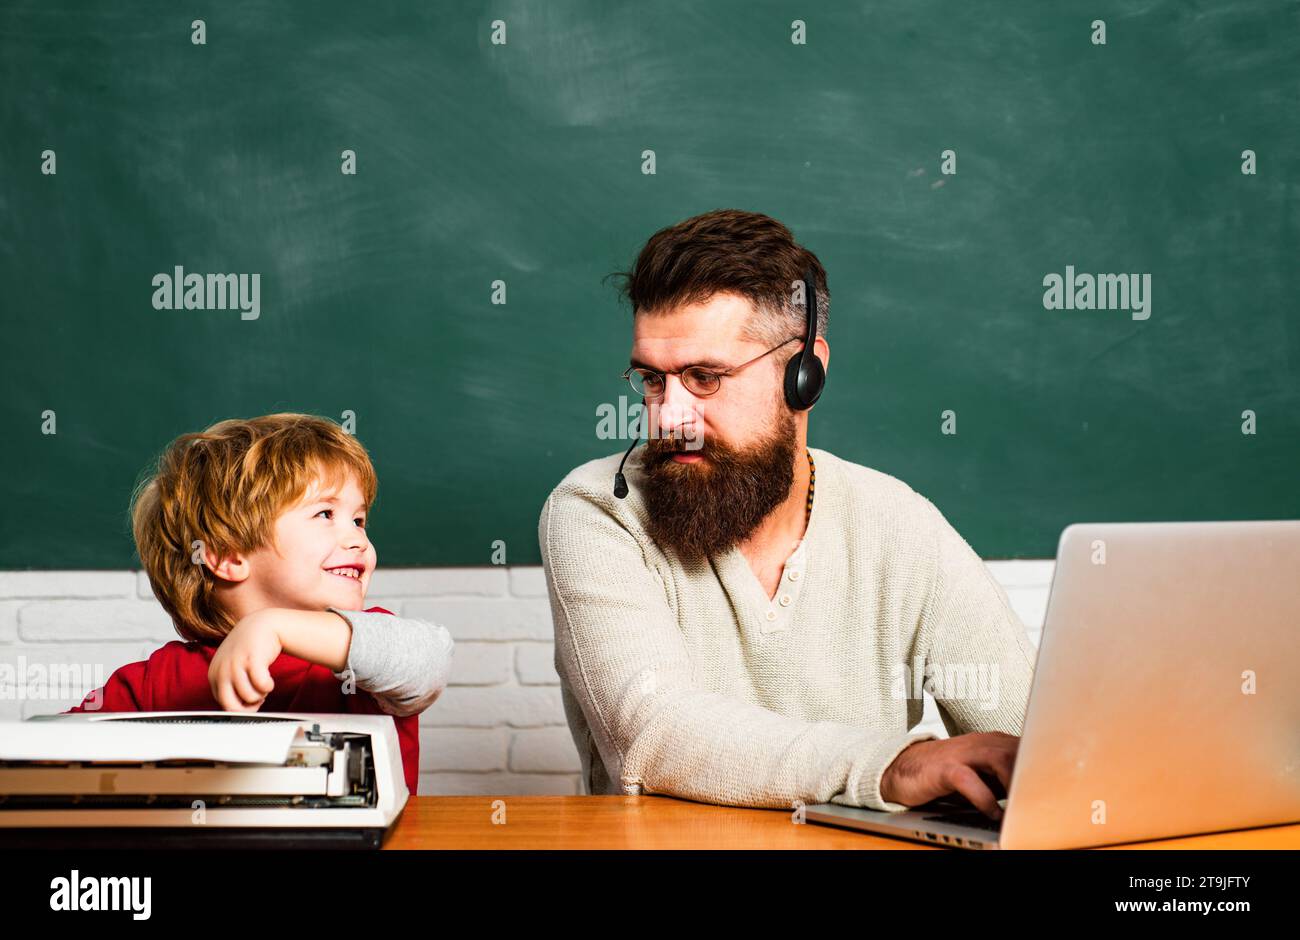 Man teacher play with preschooler child. Back to school. Tutoring. Man teaches child. Daddy and son together. Teacher helping pupils studying on desks Stock Photo